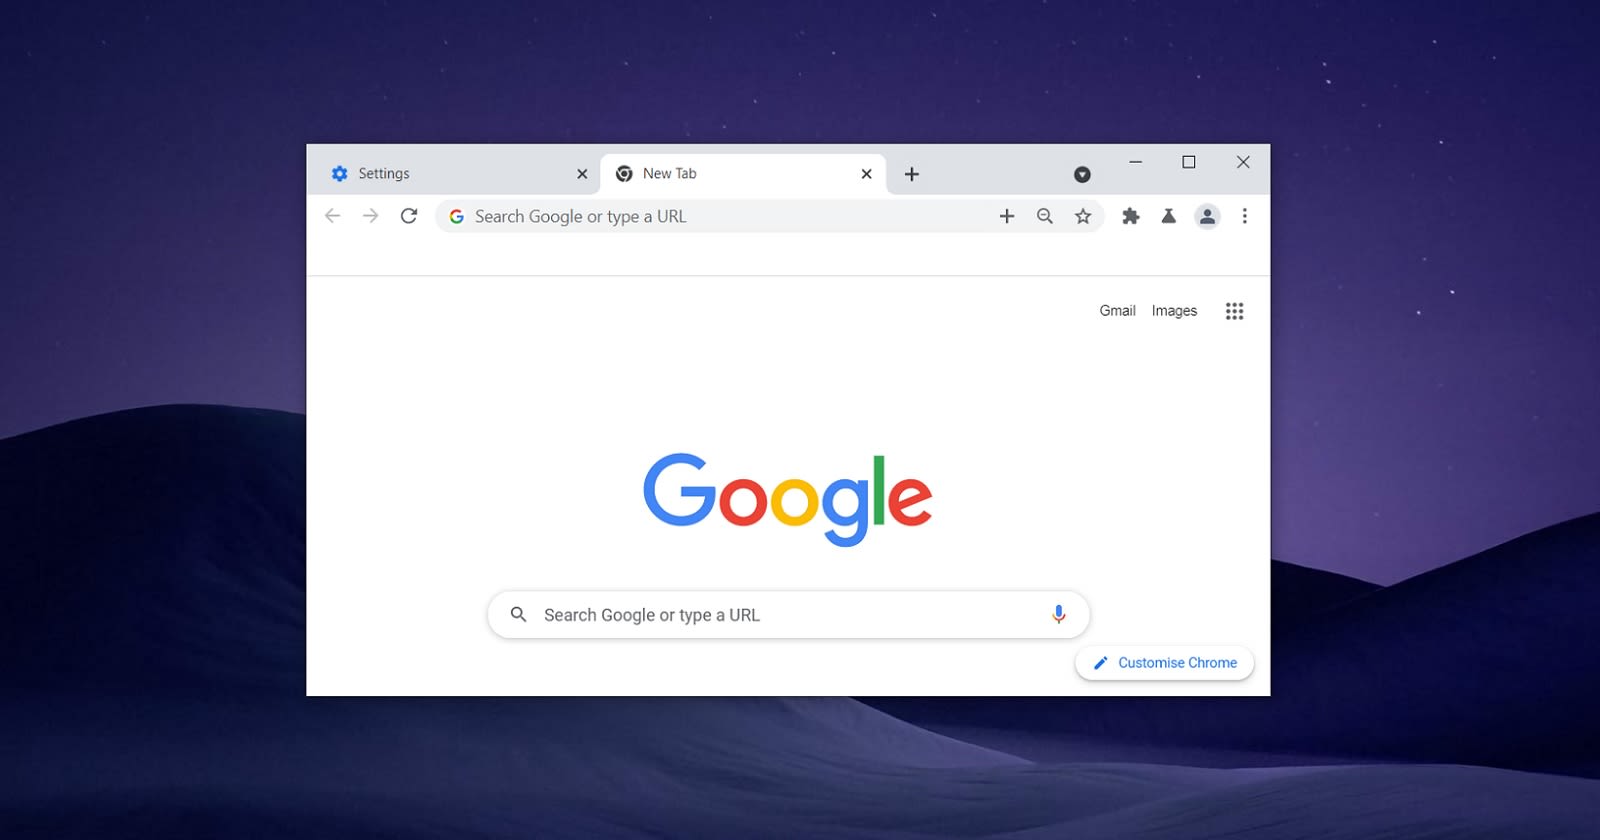 Google Chrome on Windows now warns when a website is spamming notifications